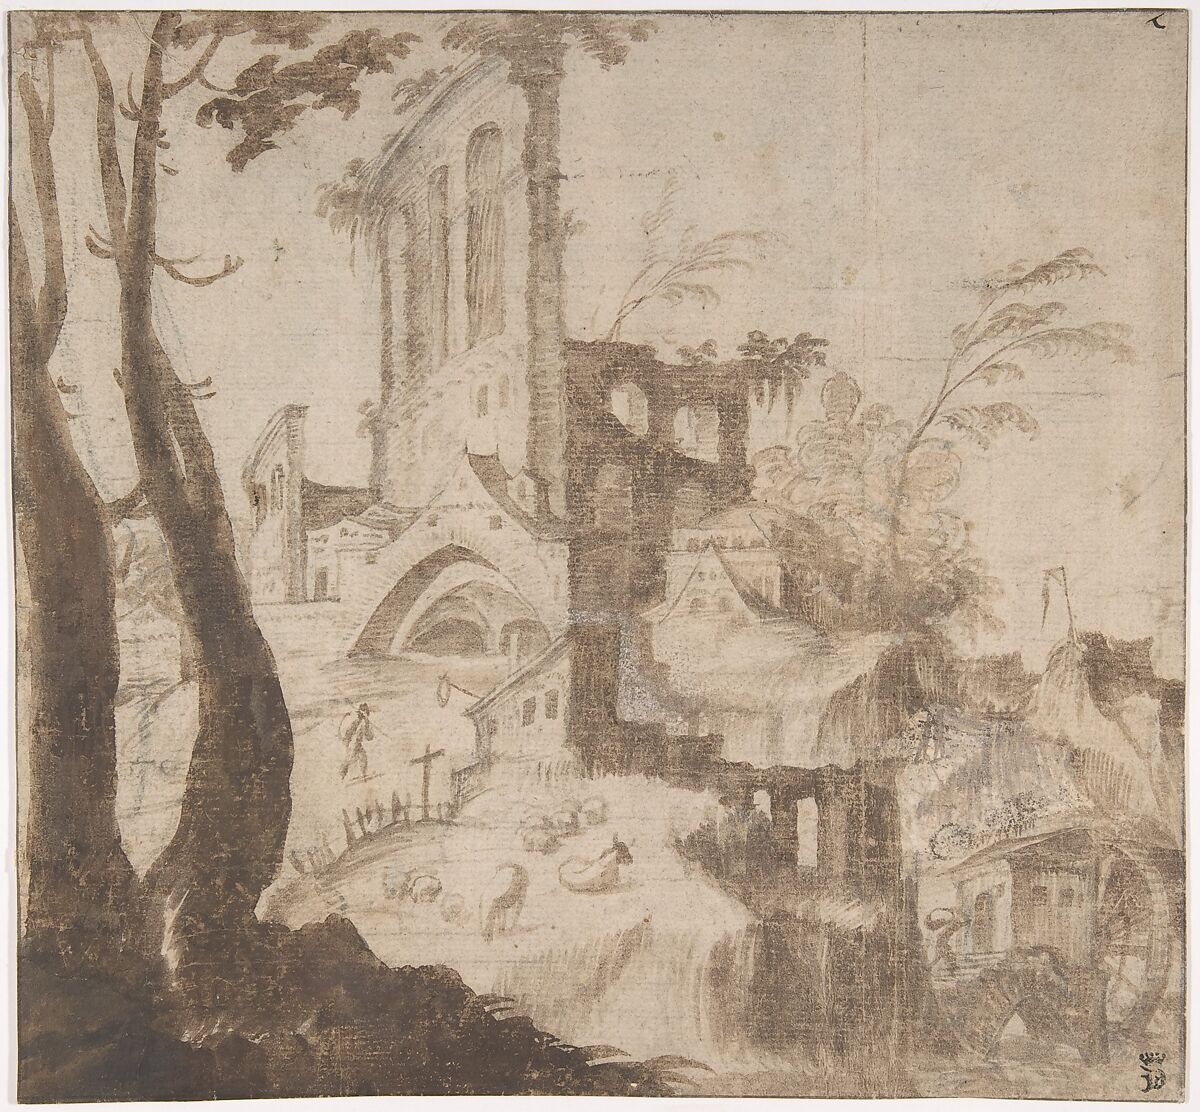 Imaginary Hilly Landscape with Ruins, Anonymous, Netherlandish, 16th century, Brush and brown wash over traces of black chalk, heightened with white 